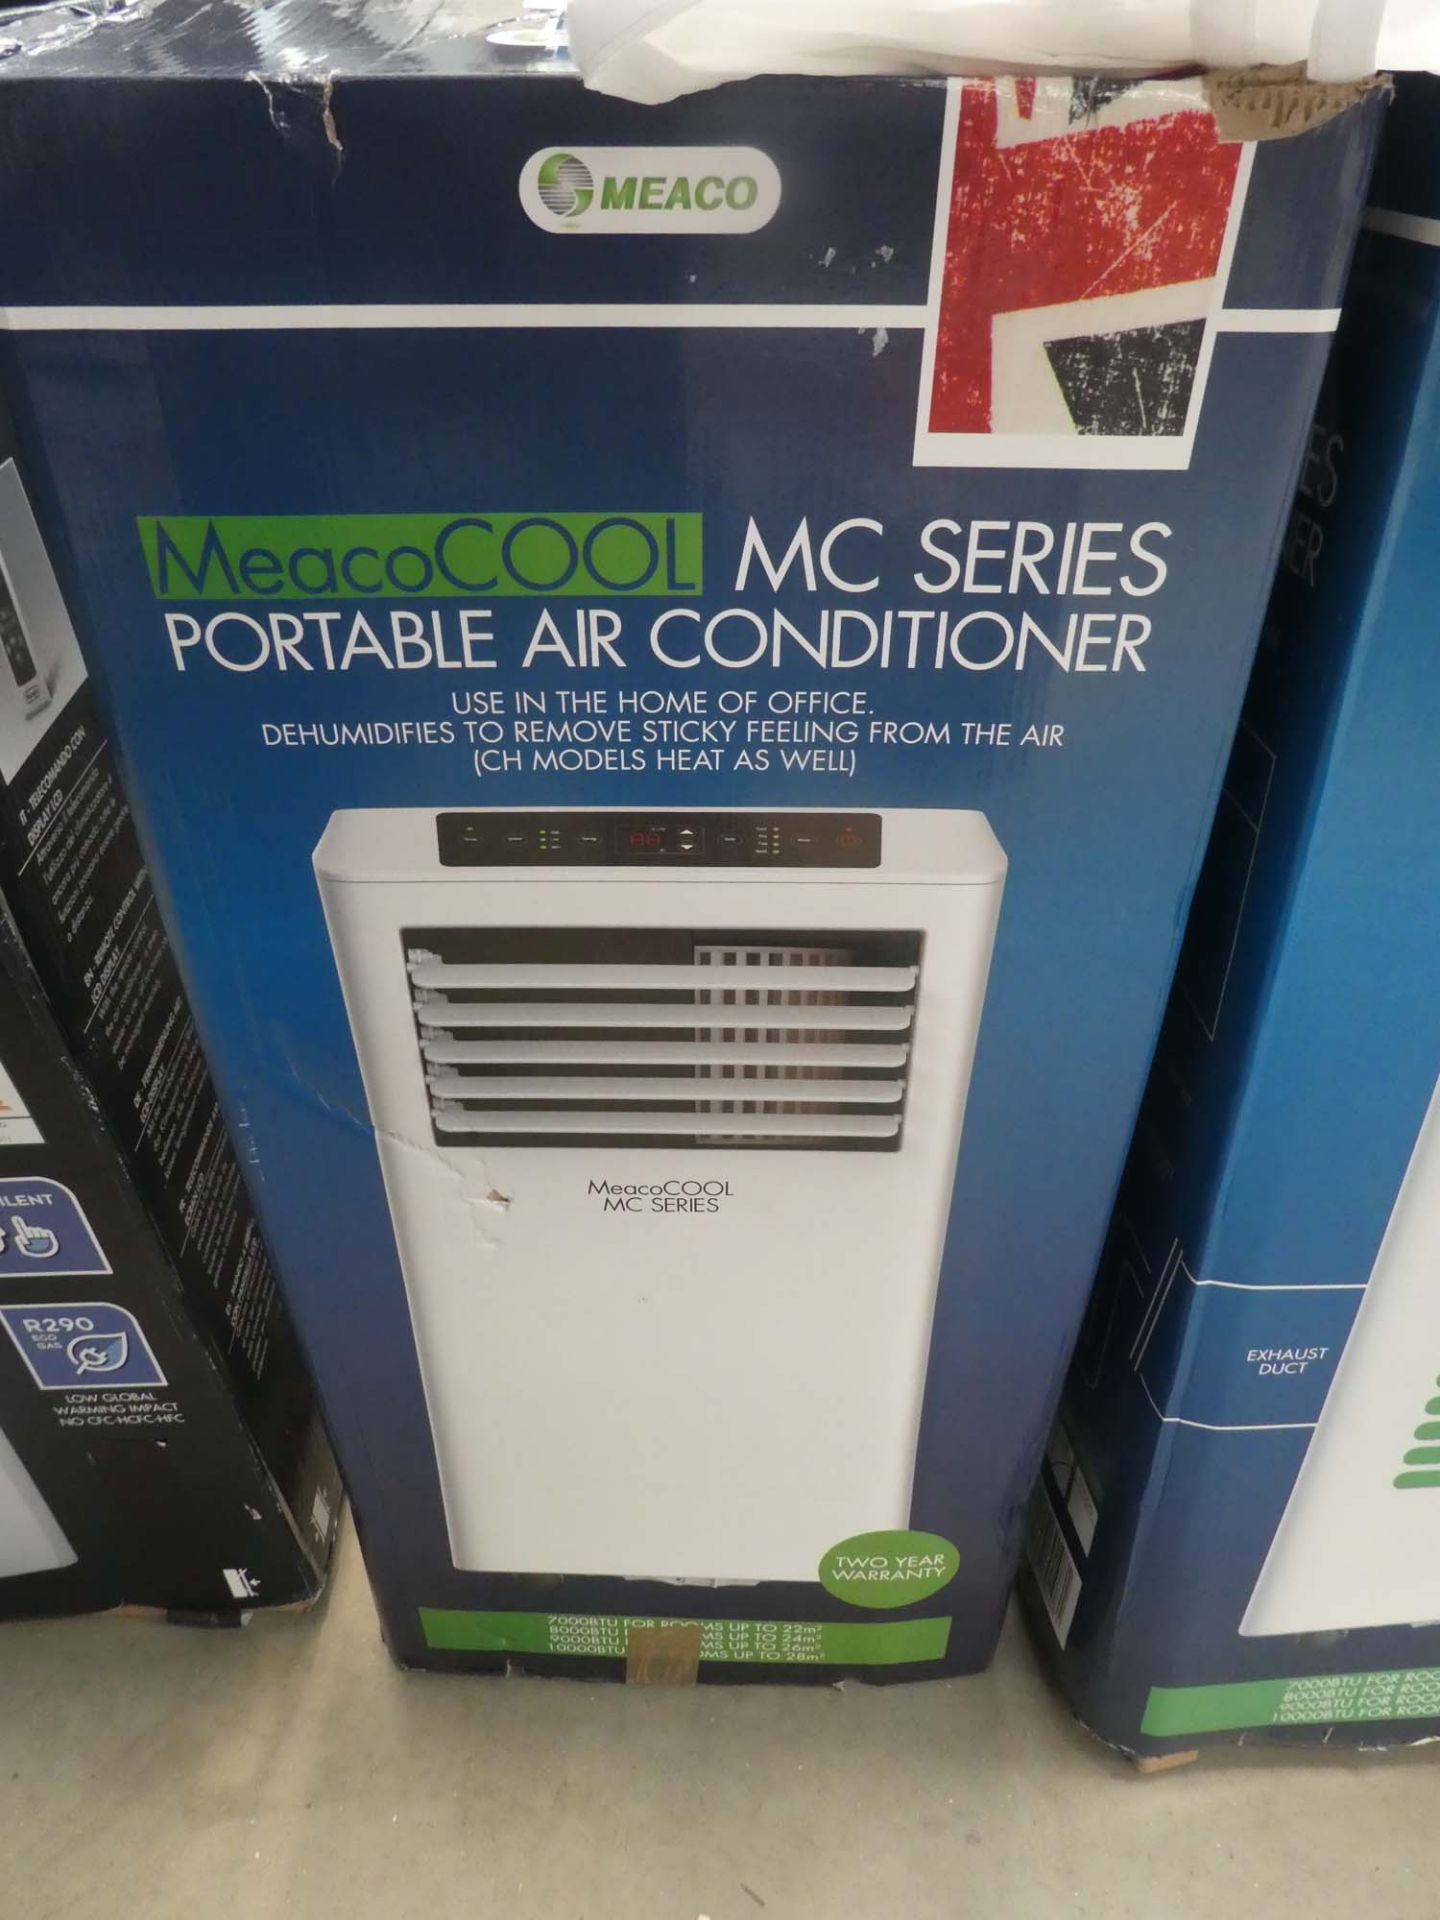 Meaco cool portable air conditioner, boxed